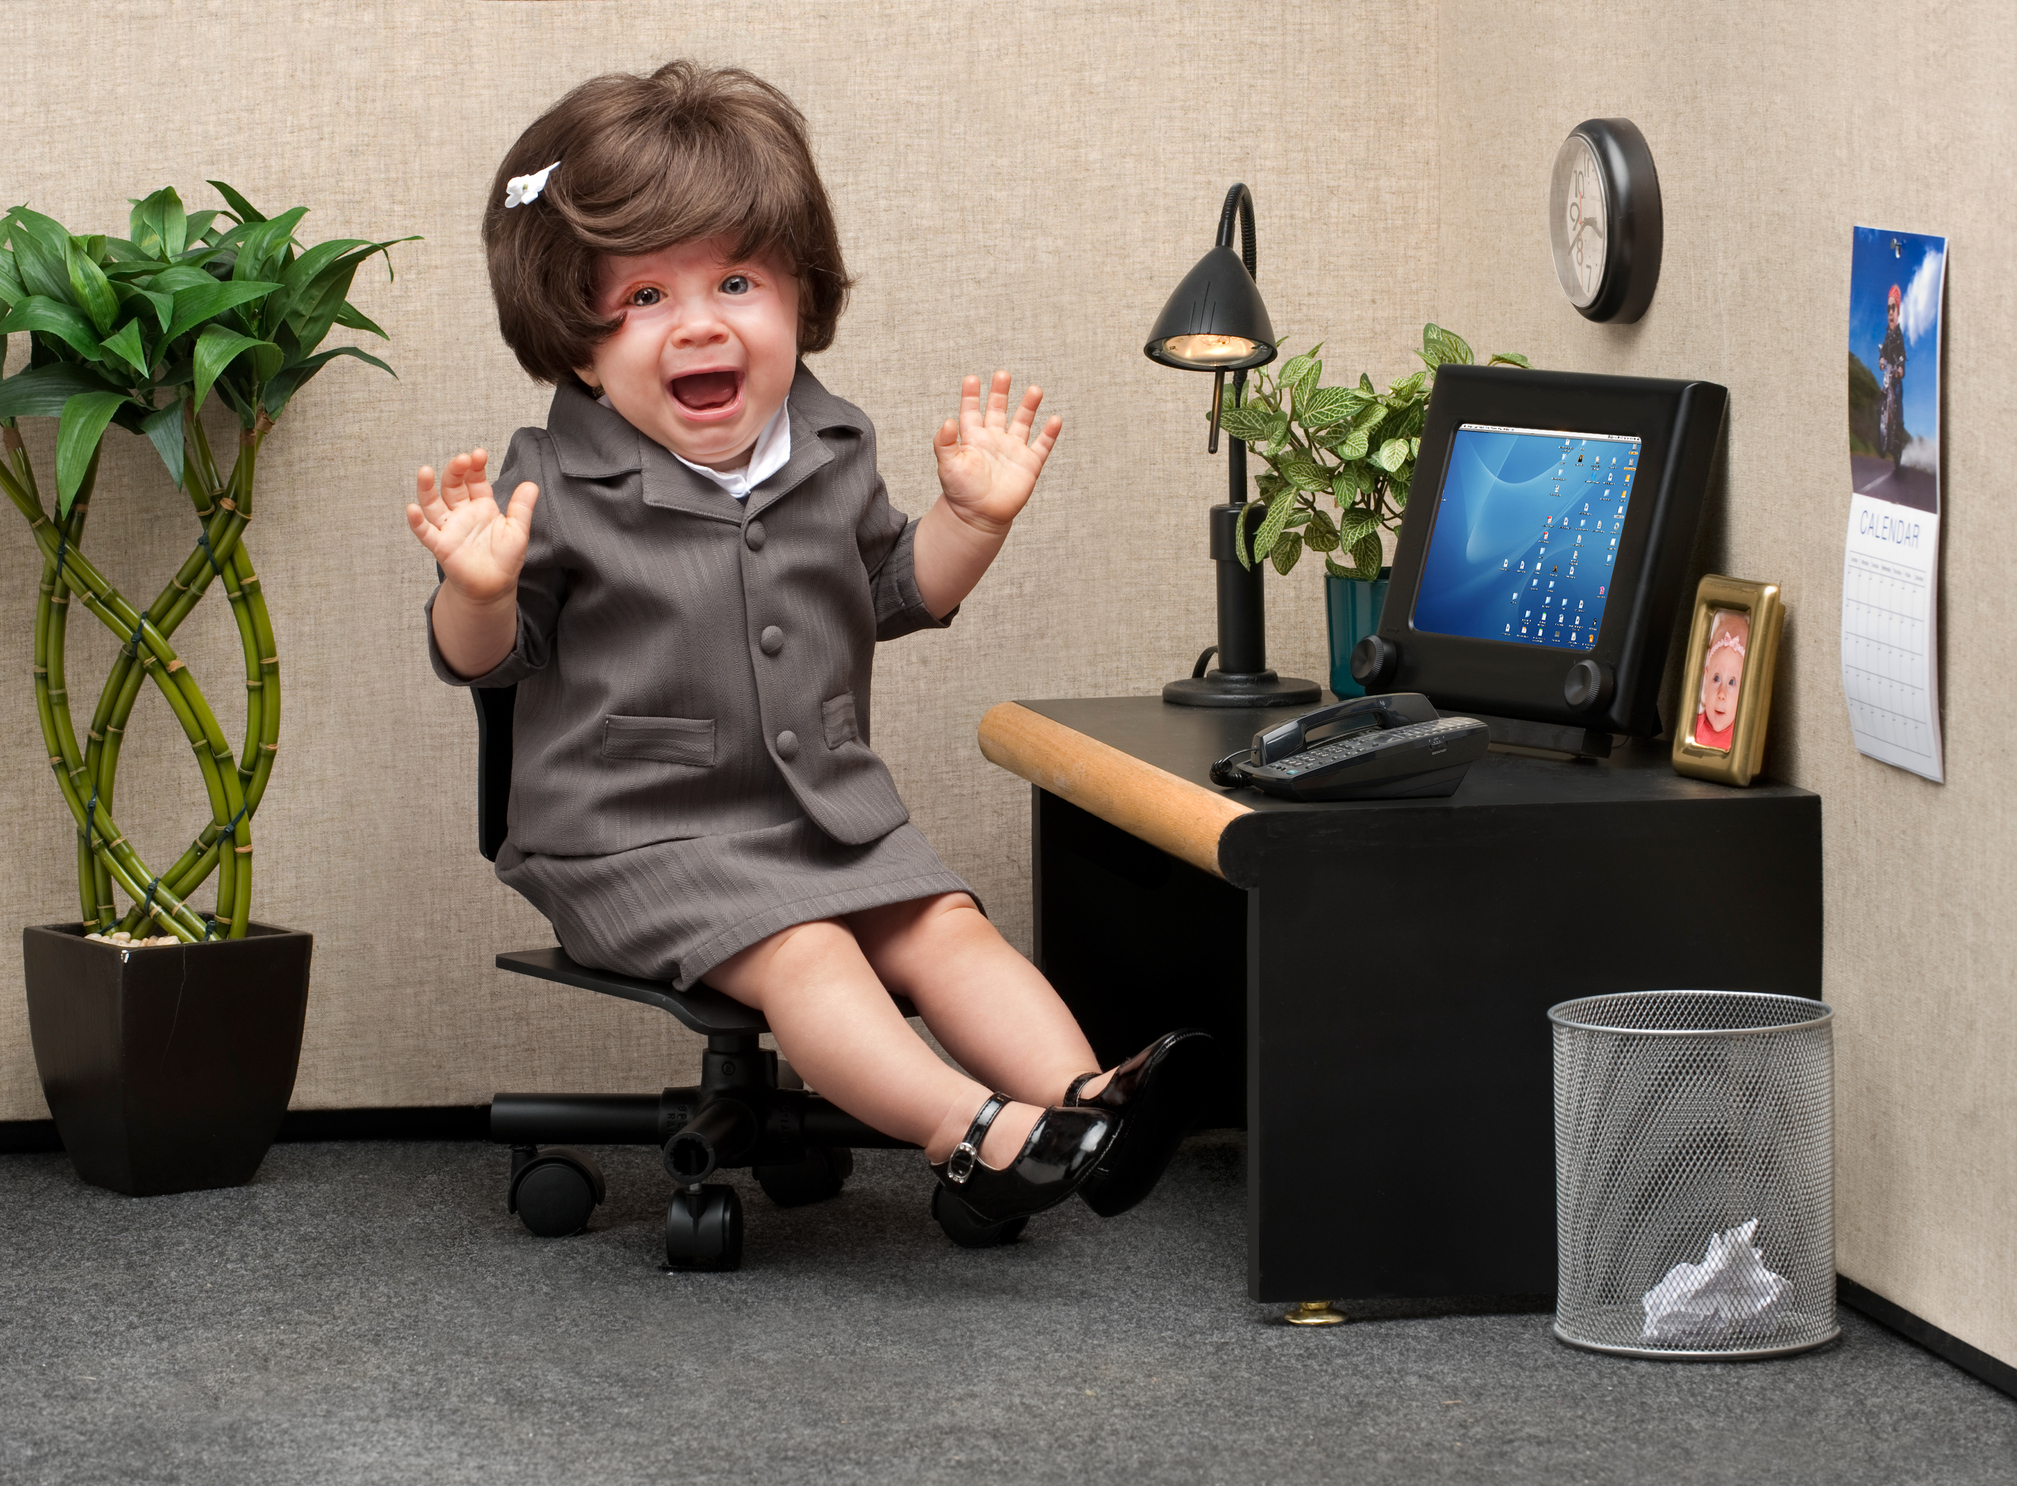 Baby dressed as office worker sits crying at desk